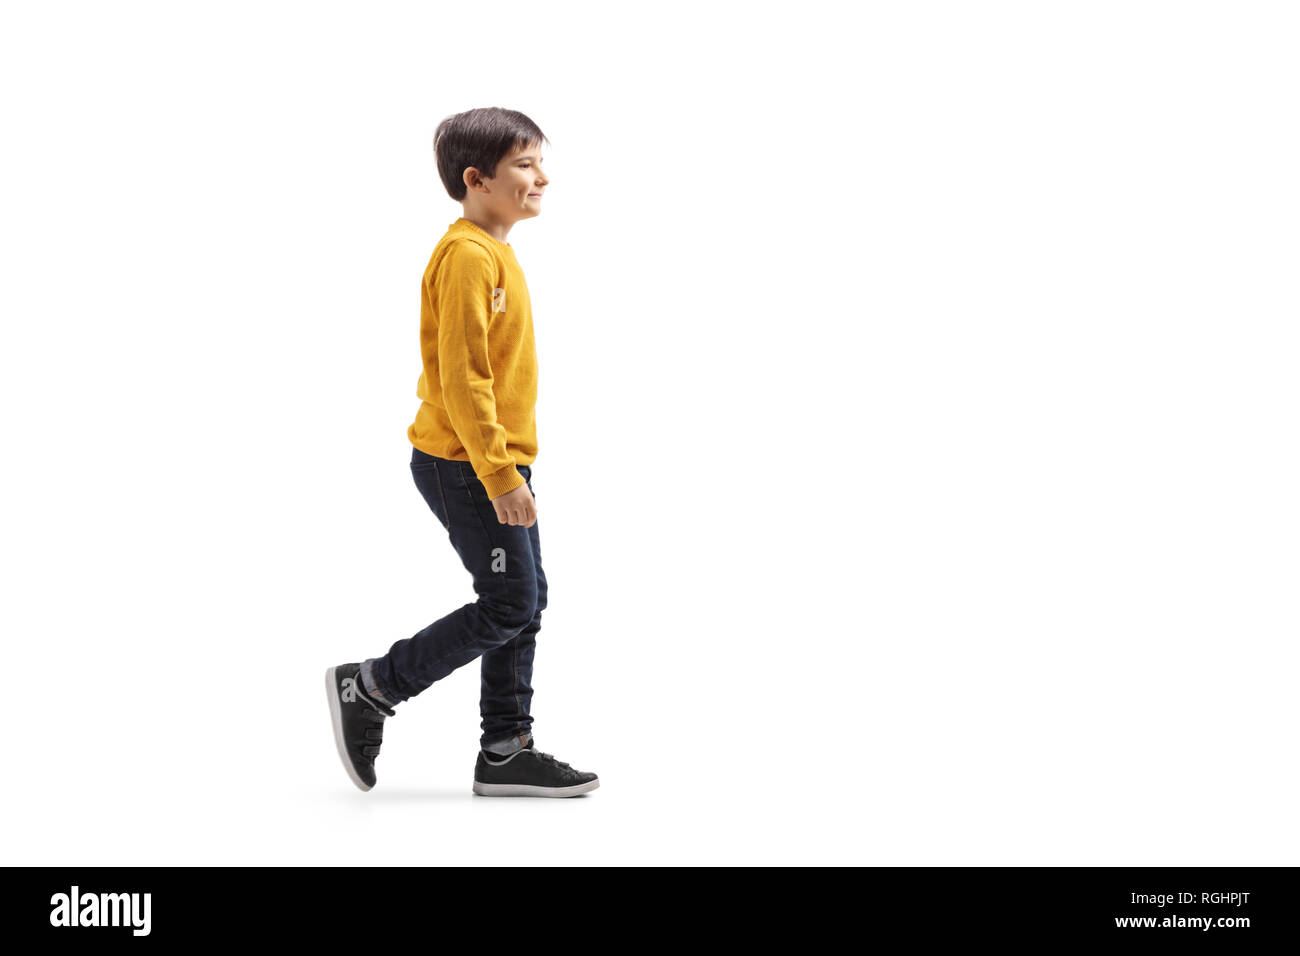 Full length profile shot of a boy walking and smiling isolated on white background Stock Photo